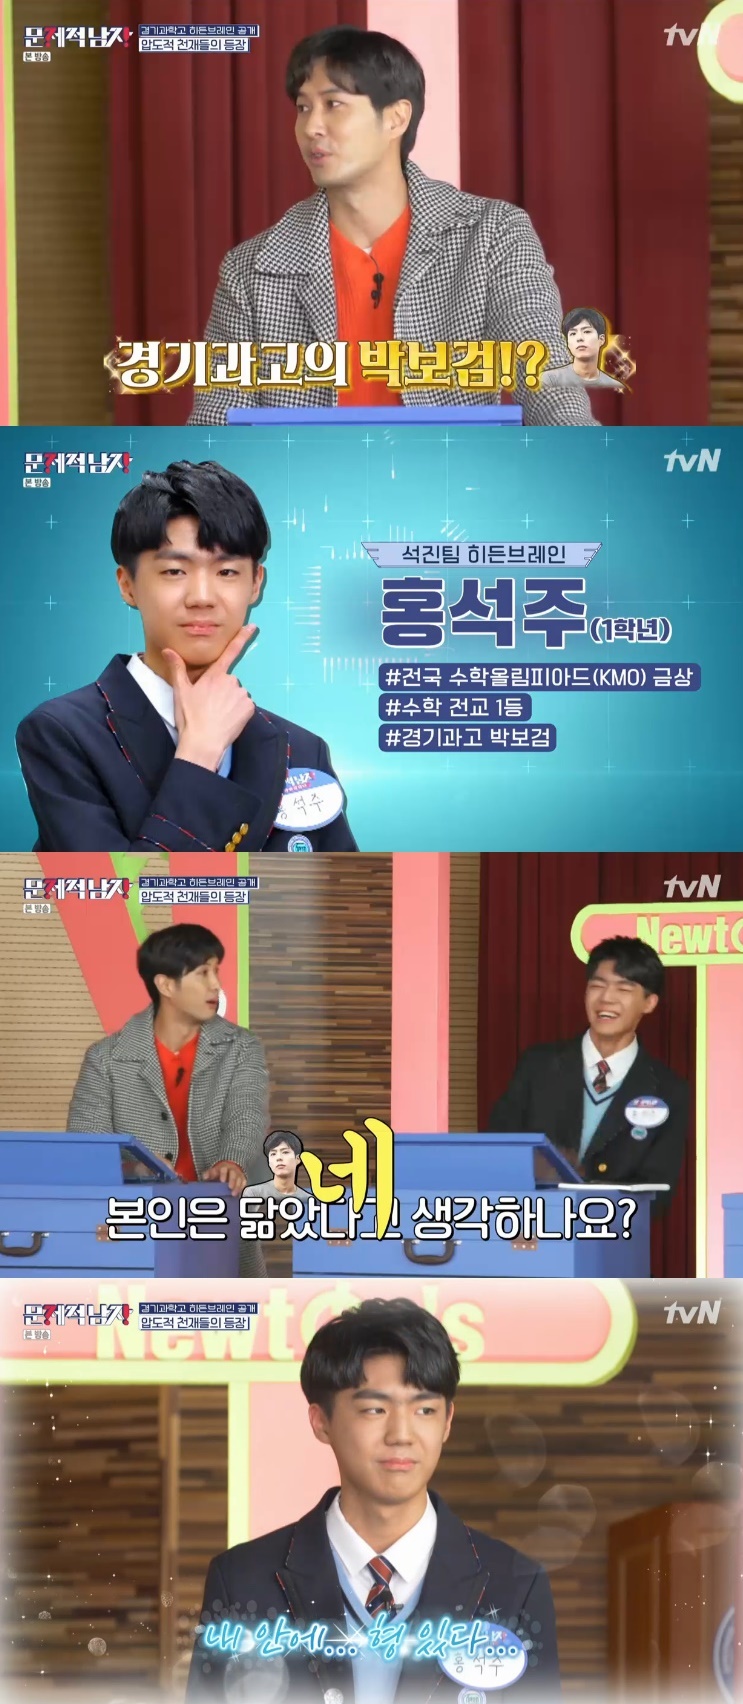 Seoul = = Problematic Man featured a first-year math genius at Gyeonggibuk Science High School.In the TVN entertainment program Problematic Man: Brain Wanderers broadcasted on the afternoon of the 16th, Ha Seok-jin team went to find Gyeonggibuk Science High School Brain to play quiz show.The student who met them was Hong tin, who explained: I think Im good at math, Ive won the National Mathematical Olympiad Gold Award.Since then, Ha Seok-jin team member Kim Ji-seok has introduced Jeon Hyun-moo team to Brain we selected is Park Bo-gum of Gyonggibuk Science High School.Hong tin laughed, answering Yes to the question Do you think you resemble yourself? Then he said, Because many people around me say that.